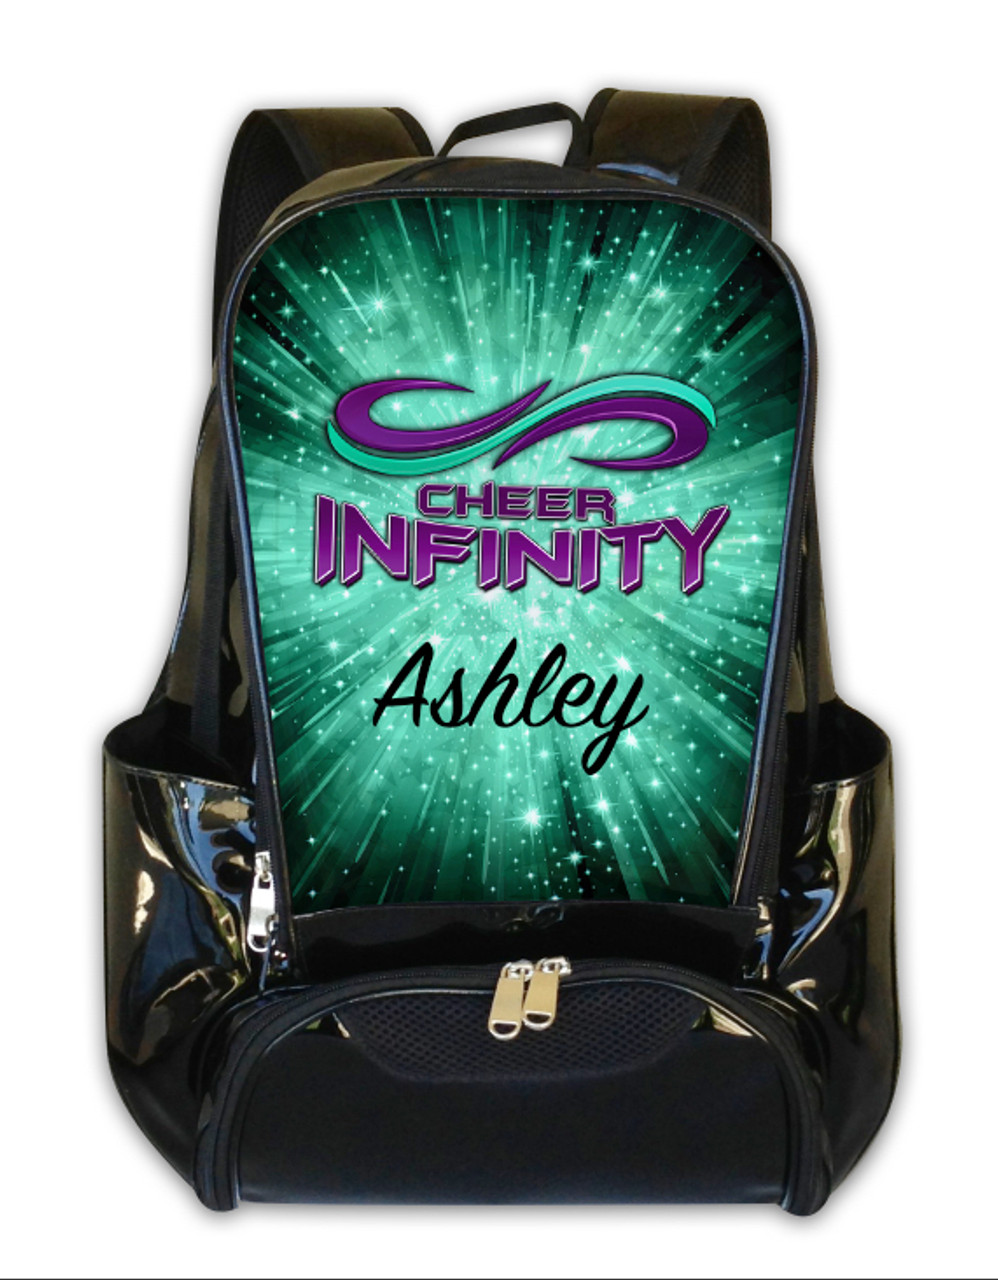 Customized And Personalized Cheer Infinity Nc Backpack